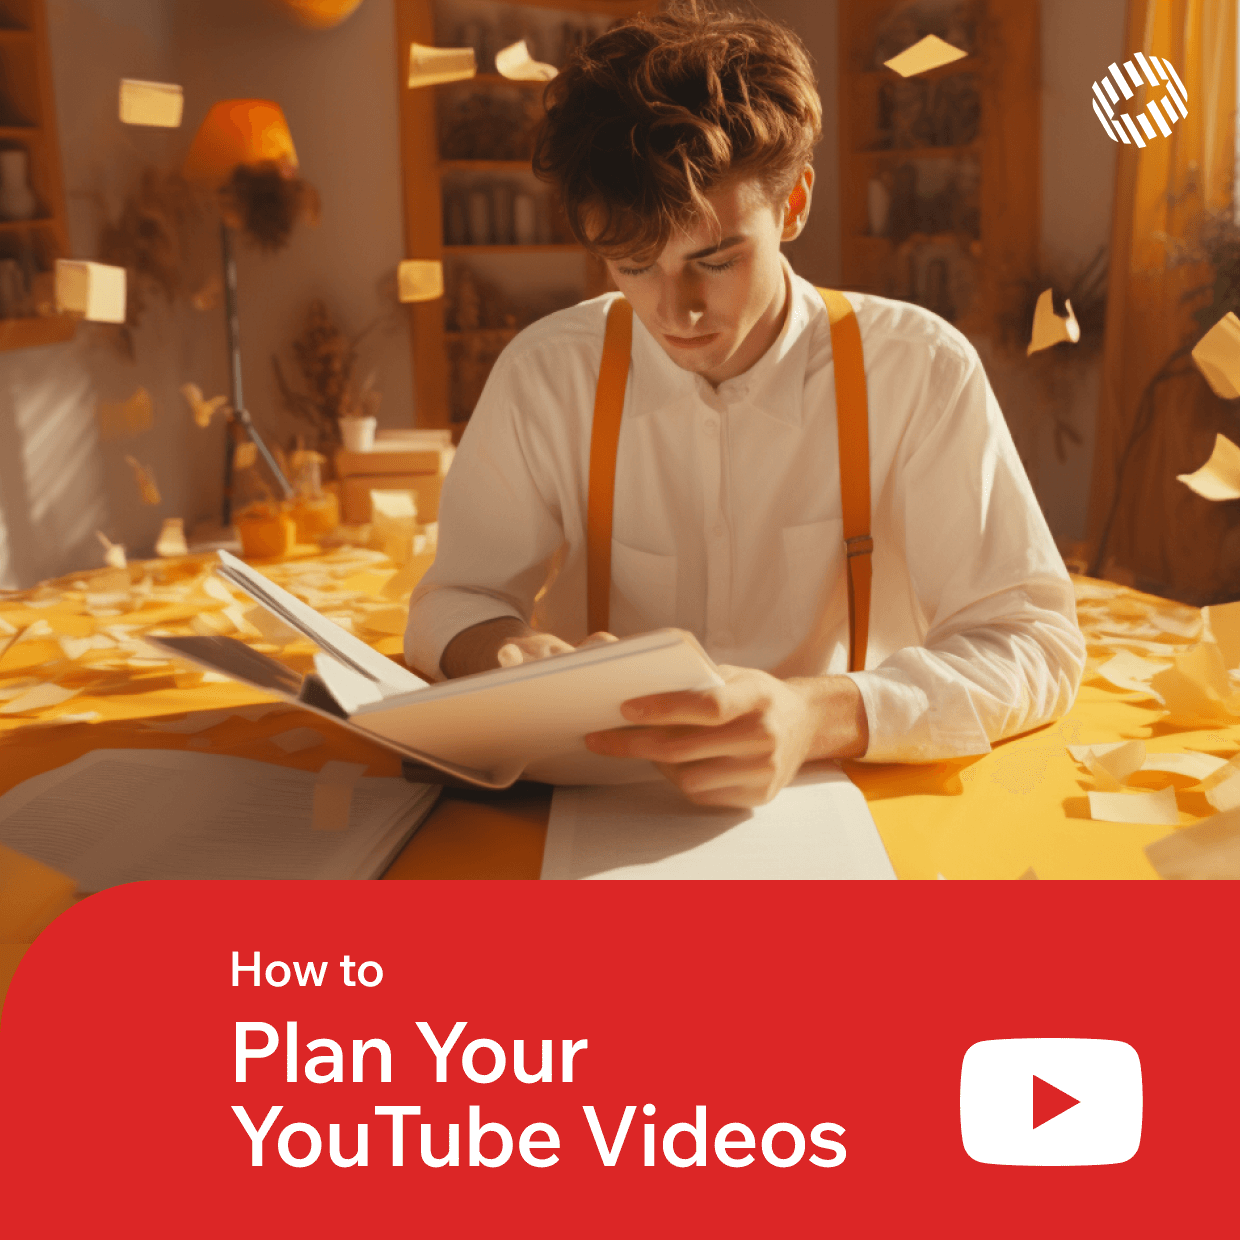 How to Plan Your YouTube Videos